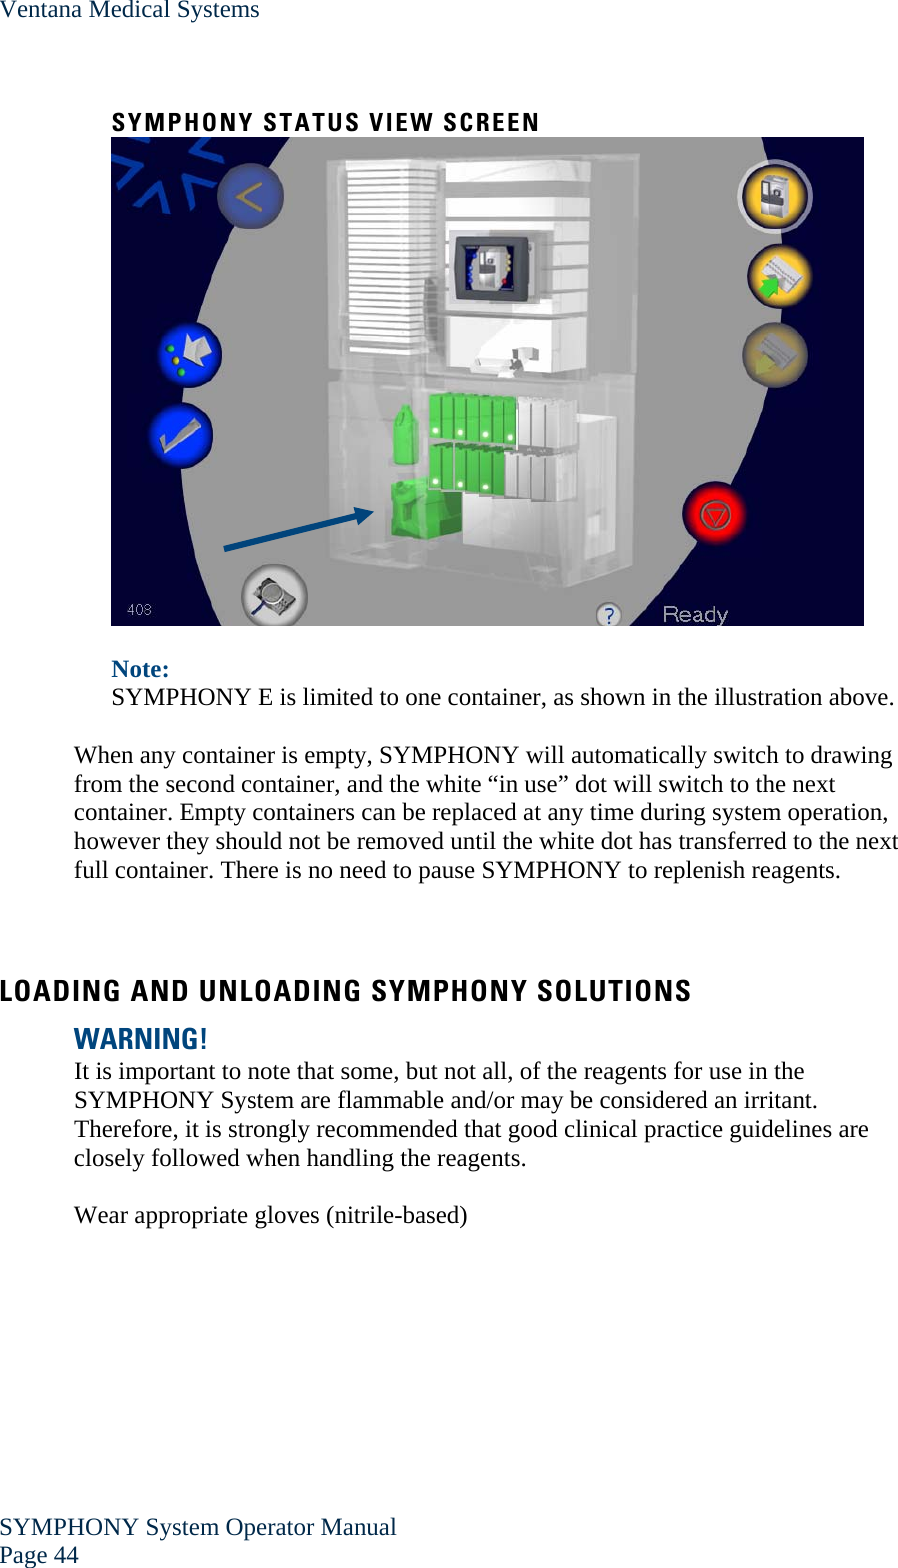 Ventana Medical Systems SYMPHONY System Operator Manual Page 44    SYMPHONY STATUS VIEW SCREEN   Note:  SYMPHONY E is limited to one container, as shown in the illustration above.  When any container is empty, SYMPHONY will automatically switch to drawing from the second container, and the white “in use” dot will switch to the next container. Empty containers can be replaced at any time during system operation, however they should not be removed until the white dot has transferred to the next full container. There is no need to pause SYMPHONY to replenish reagents.   LOADING AND UNLOADING SYMPHONY SOLUTIONS WARNING! It is important to note that some, but not all, of the reagents for use in the SYMPHONY System are flammable and/or may be considered an irritant. Therefore, it is strongly recommended that good clinical practice guidelines are closely followed when handling the reagents.  Wear appropriate gloves (nitrile-based)  